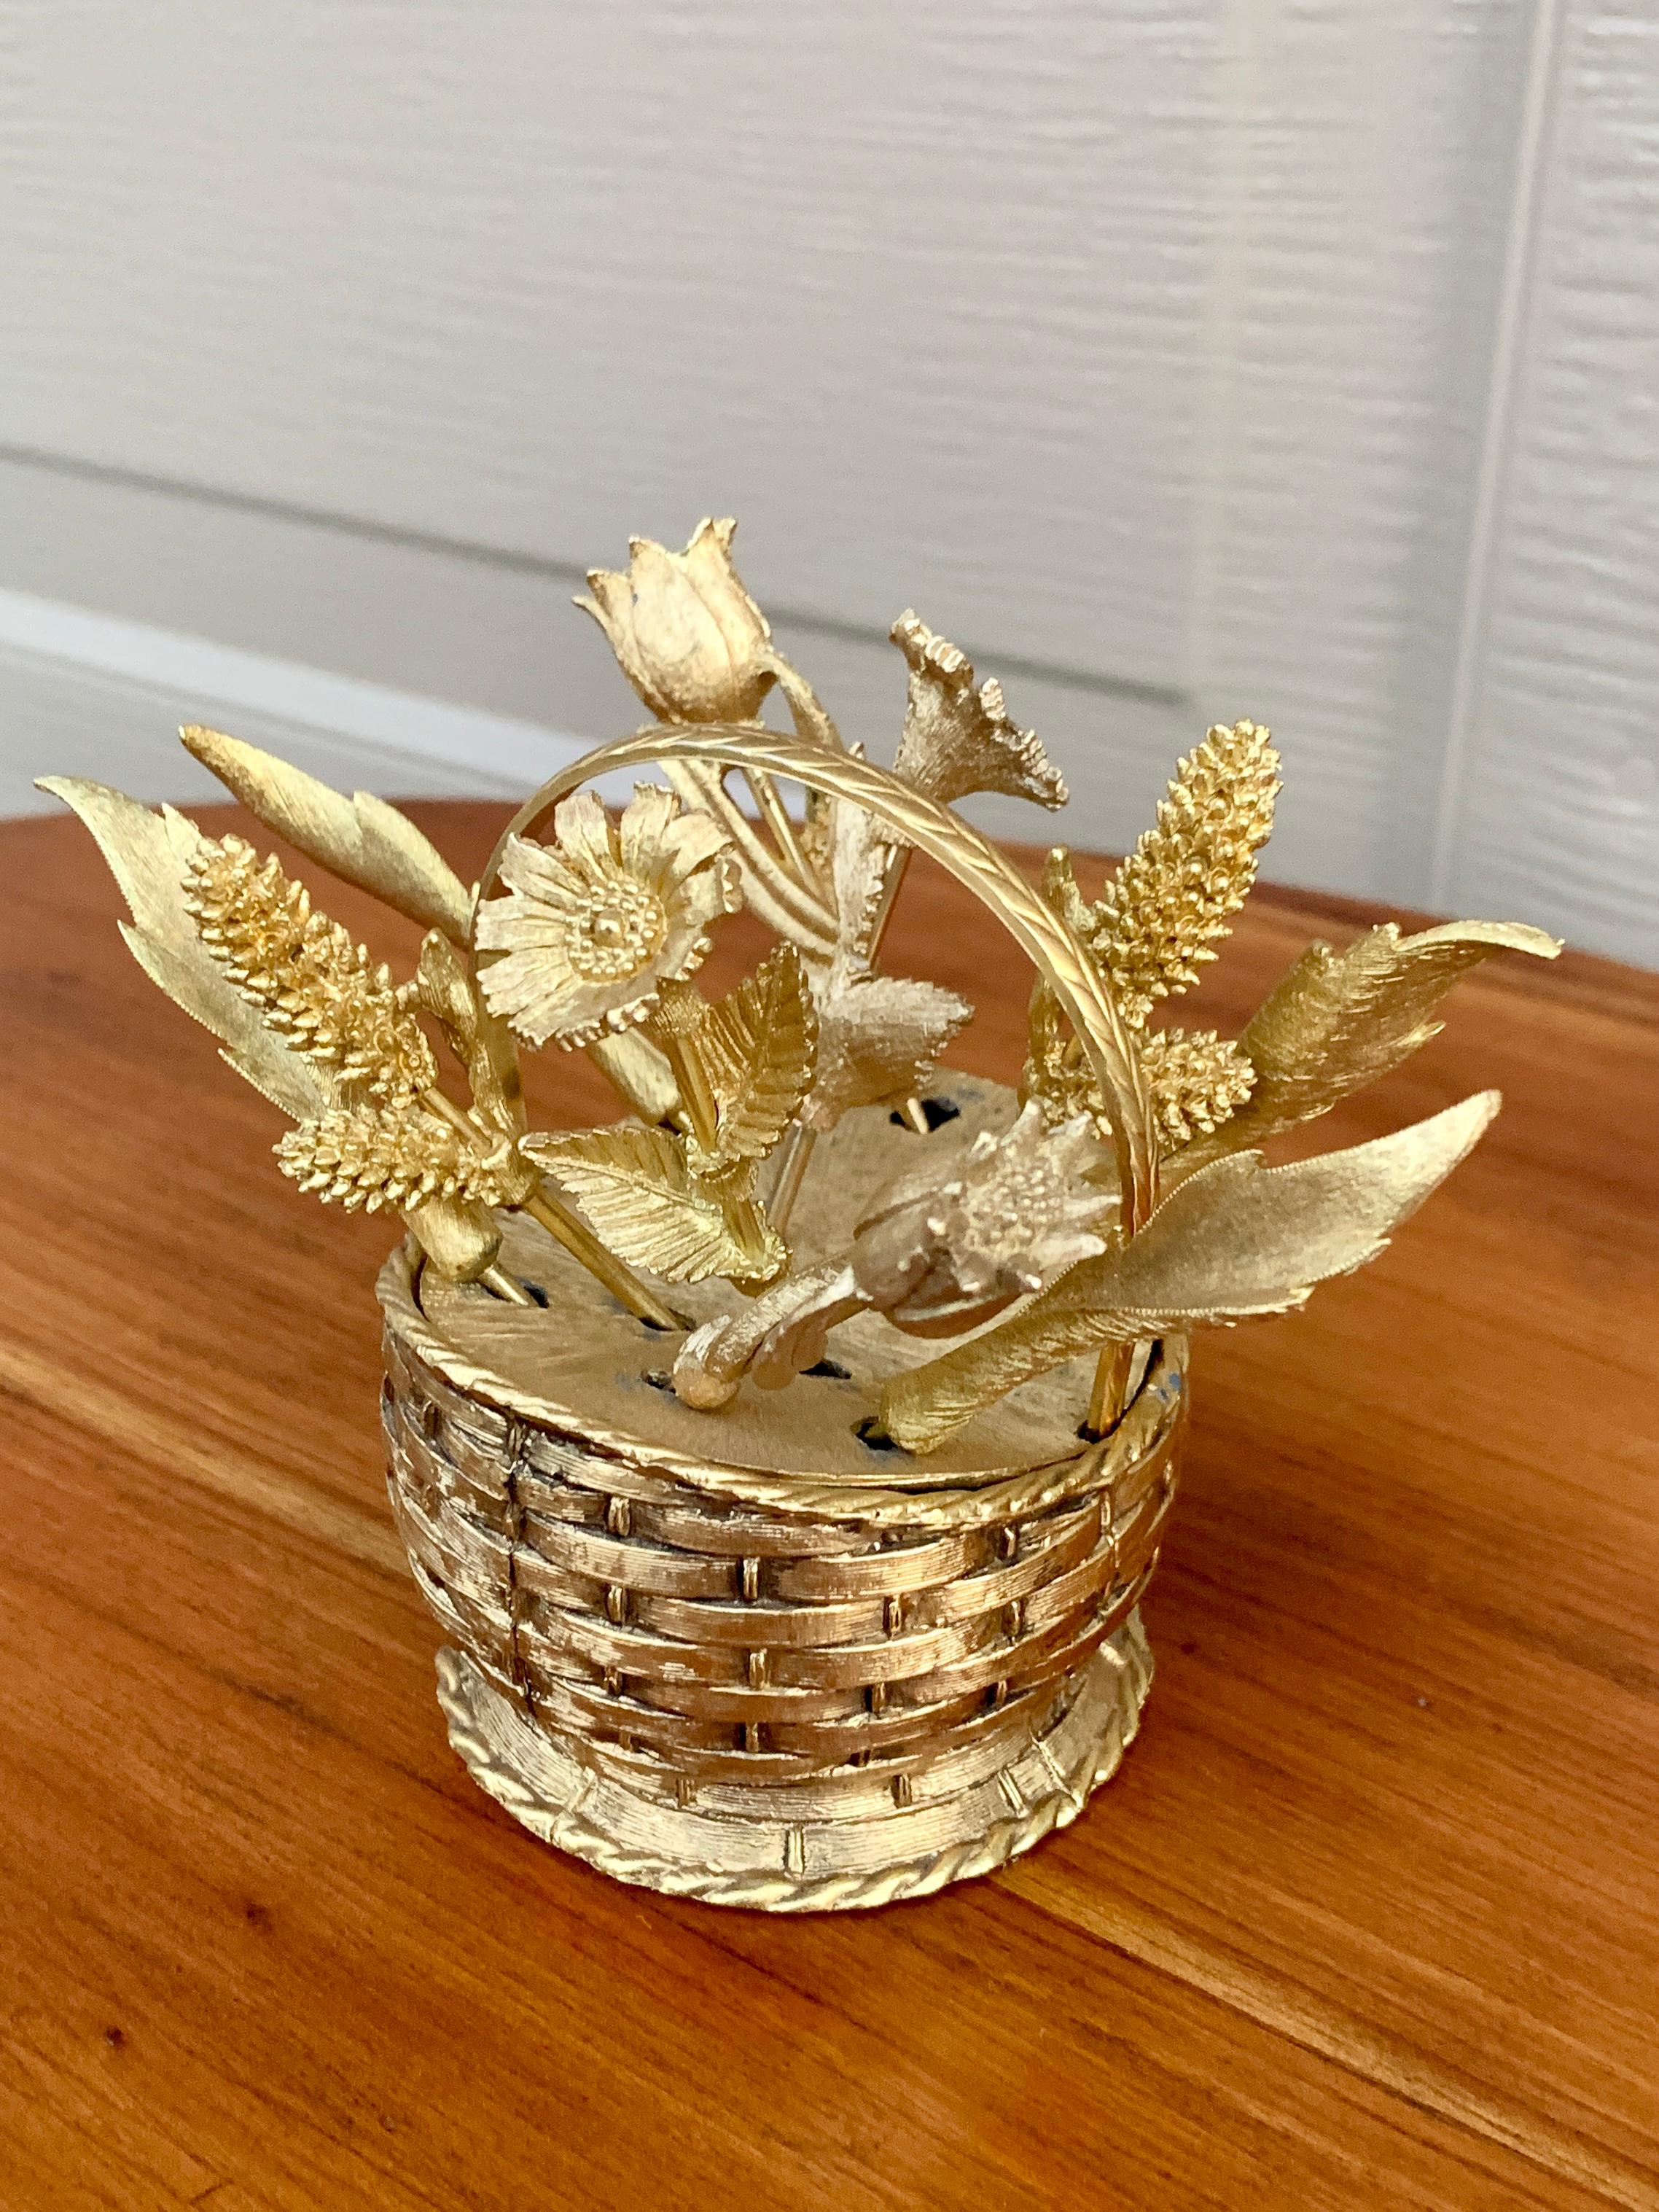 A charming mid-century Hollywood Regency cocktail pick or toothpick holder fashioned as a woven basket and flower picks.

USA, Circa 1960s

Cast gold plated metal

Measures: 4